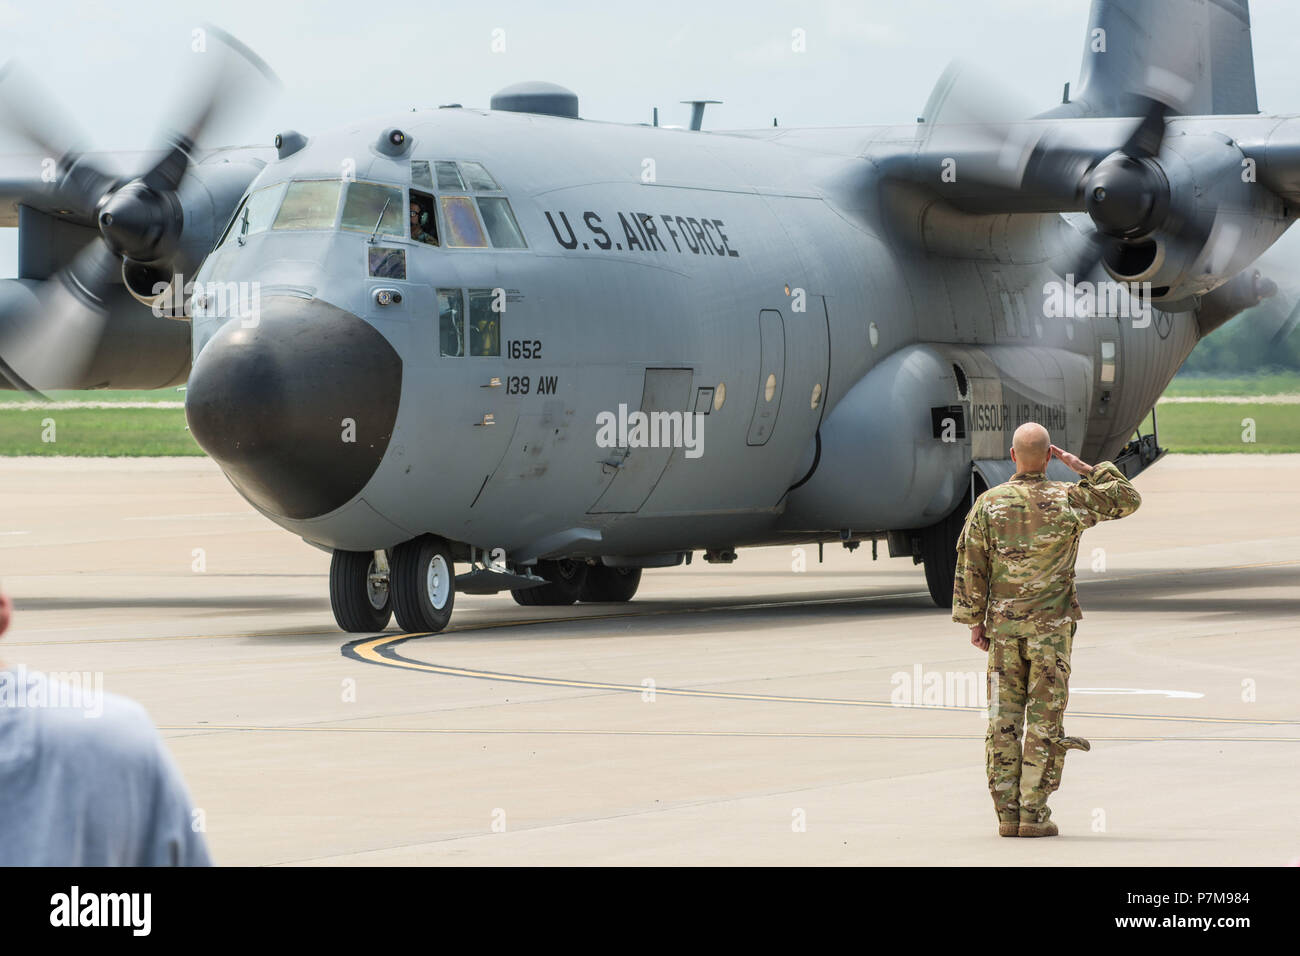 U.S. Airmen assigned to the 139th Airlift Wing, Missouri Air National Guard, return home from an overseas deployment July 5, 2018 at Rosecrans Air National Guard Base, St. Joseph, Mo. The Airmen were supporting the unit’s C-130 Hercules airlift mission in the U.S. Air Force Central Command area of responsibility. (U.S. Air National Guard photo by Master Sgt. Michael Crane) Stock Photo